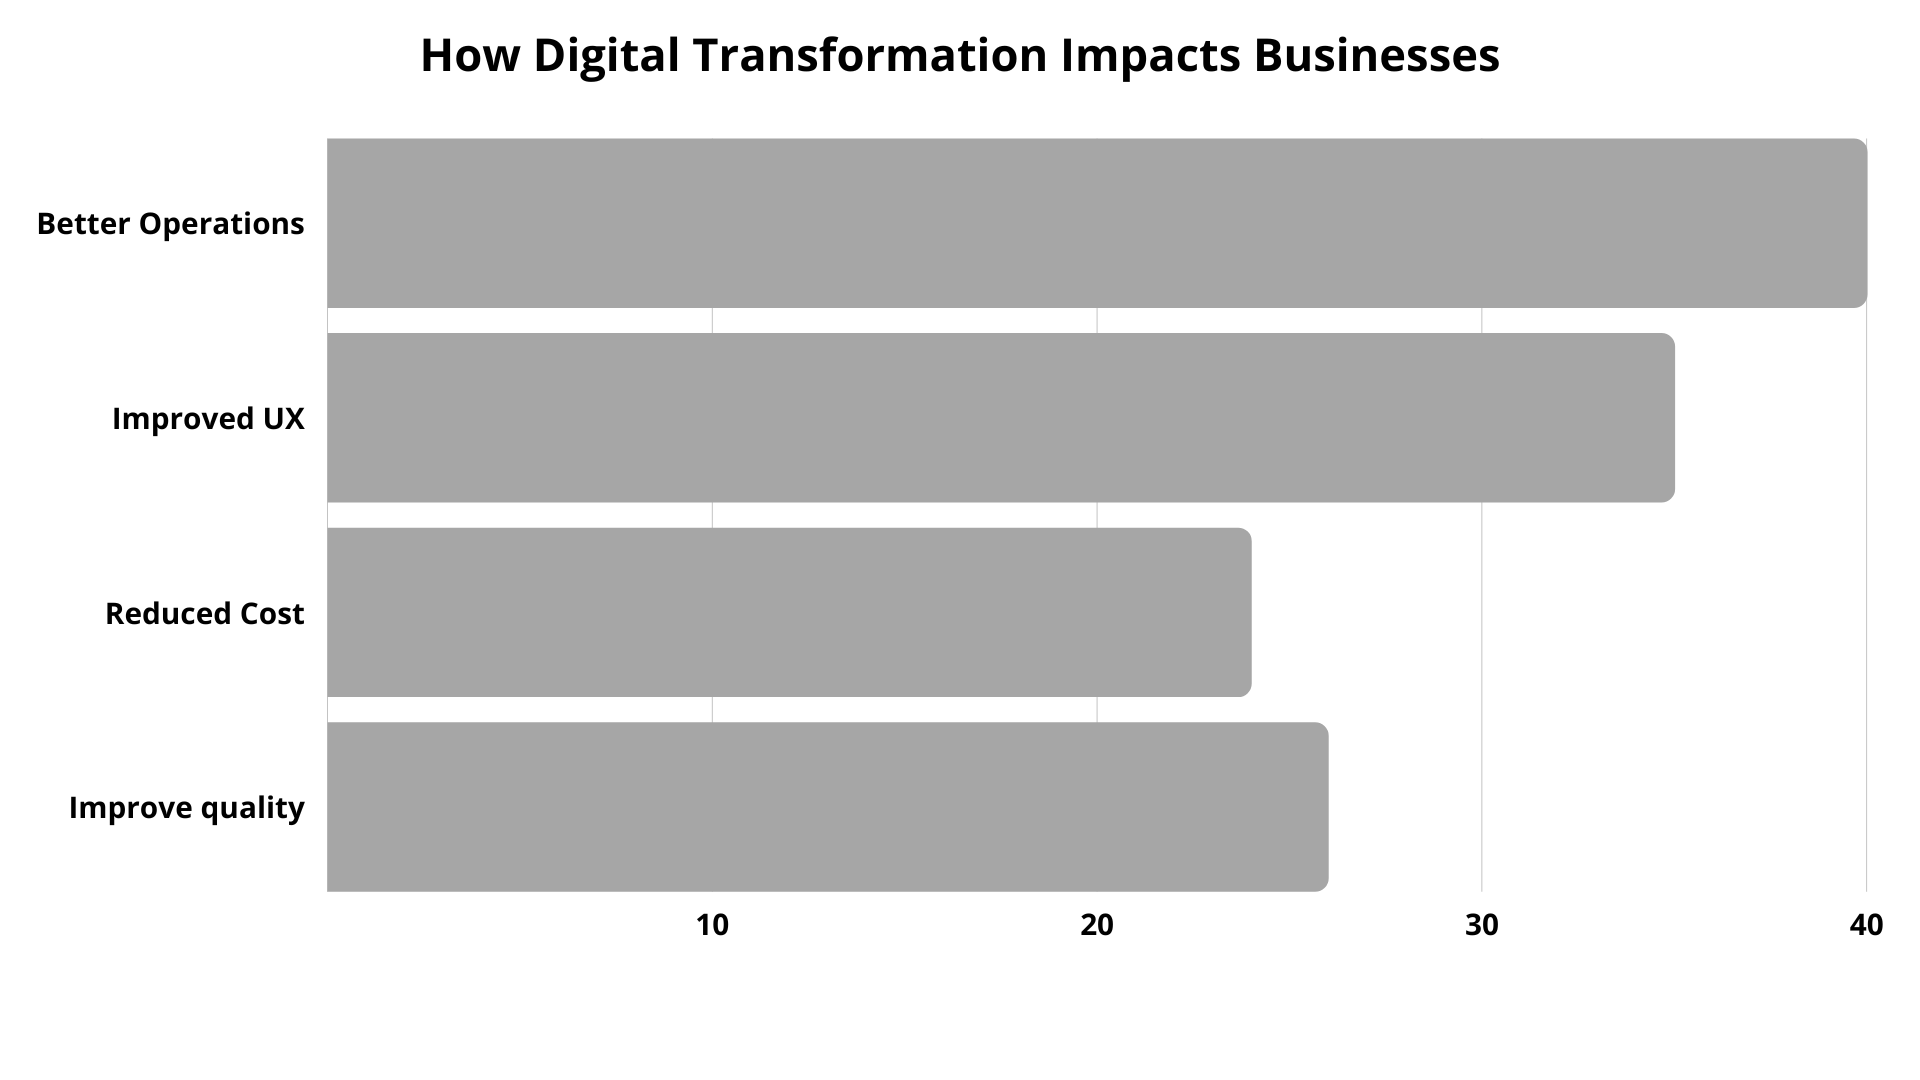 Digital transformation impacts business